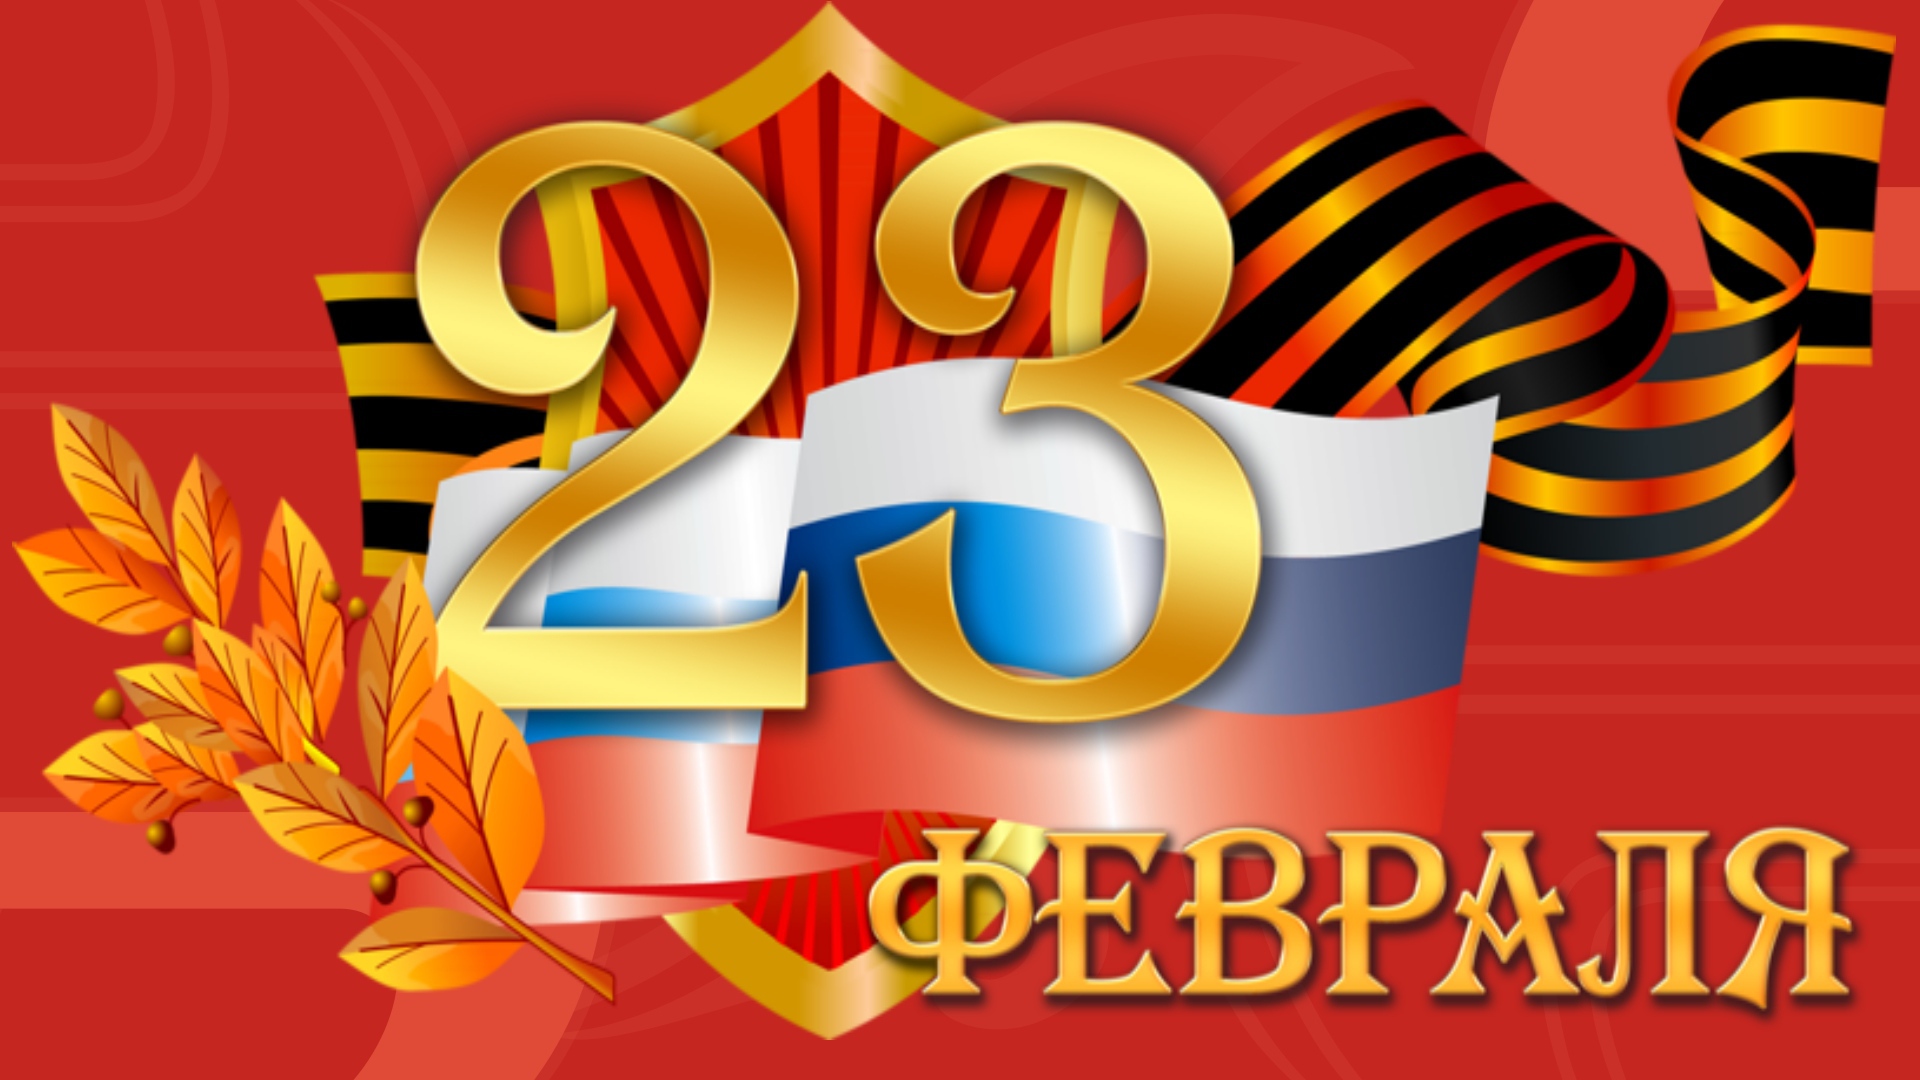 Defender of the Fatherland Day February 23